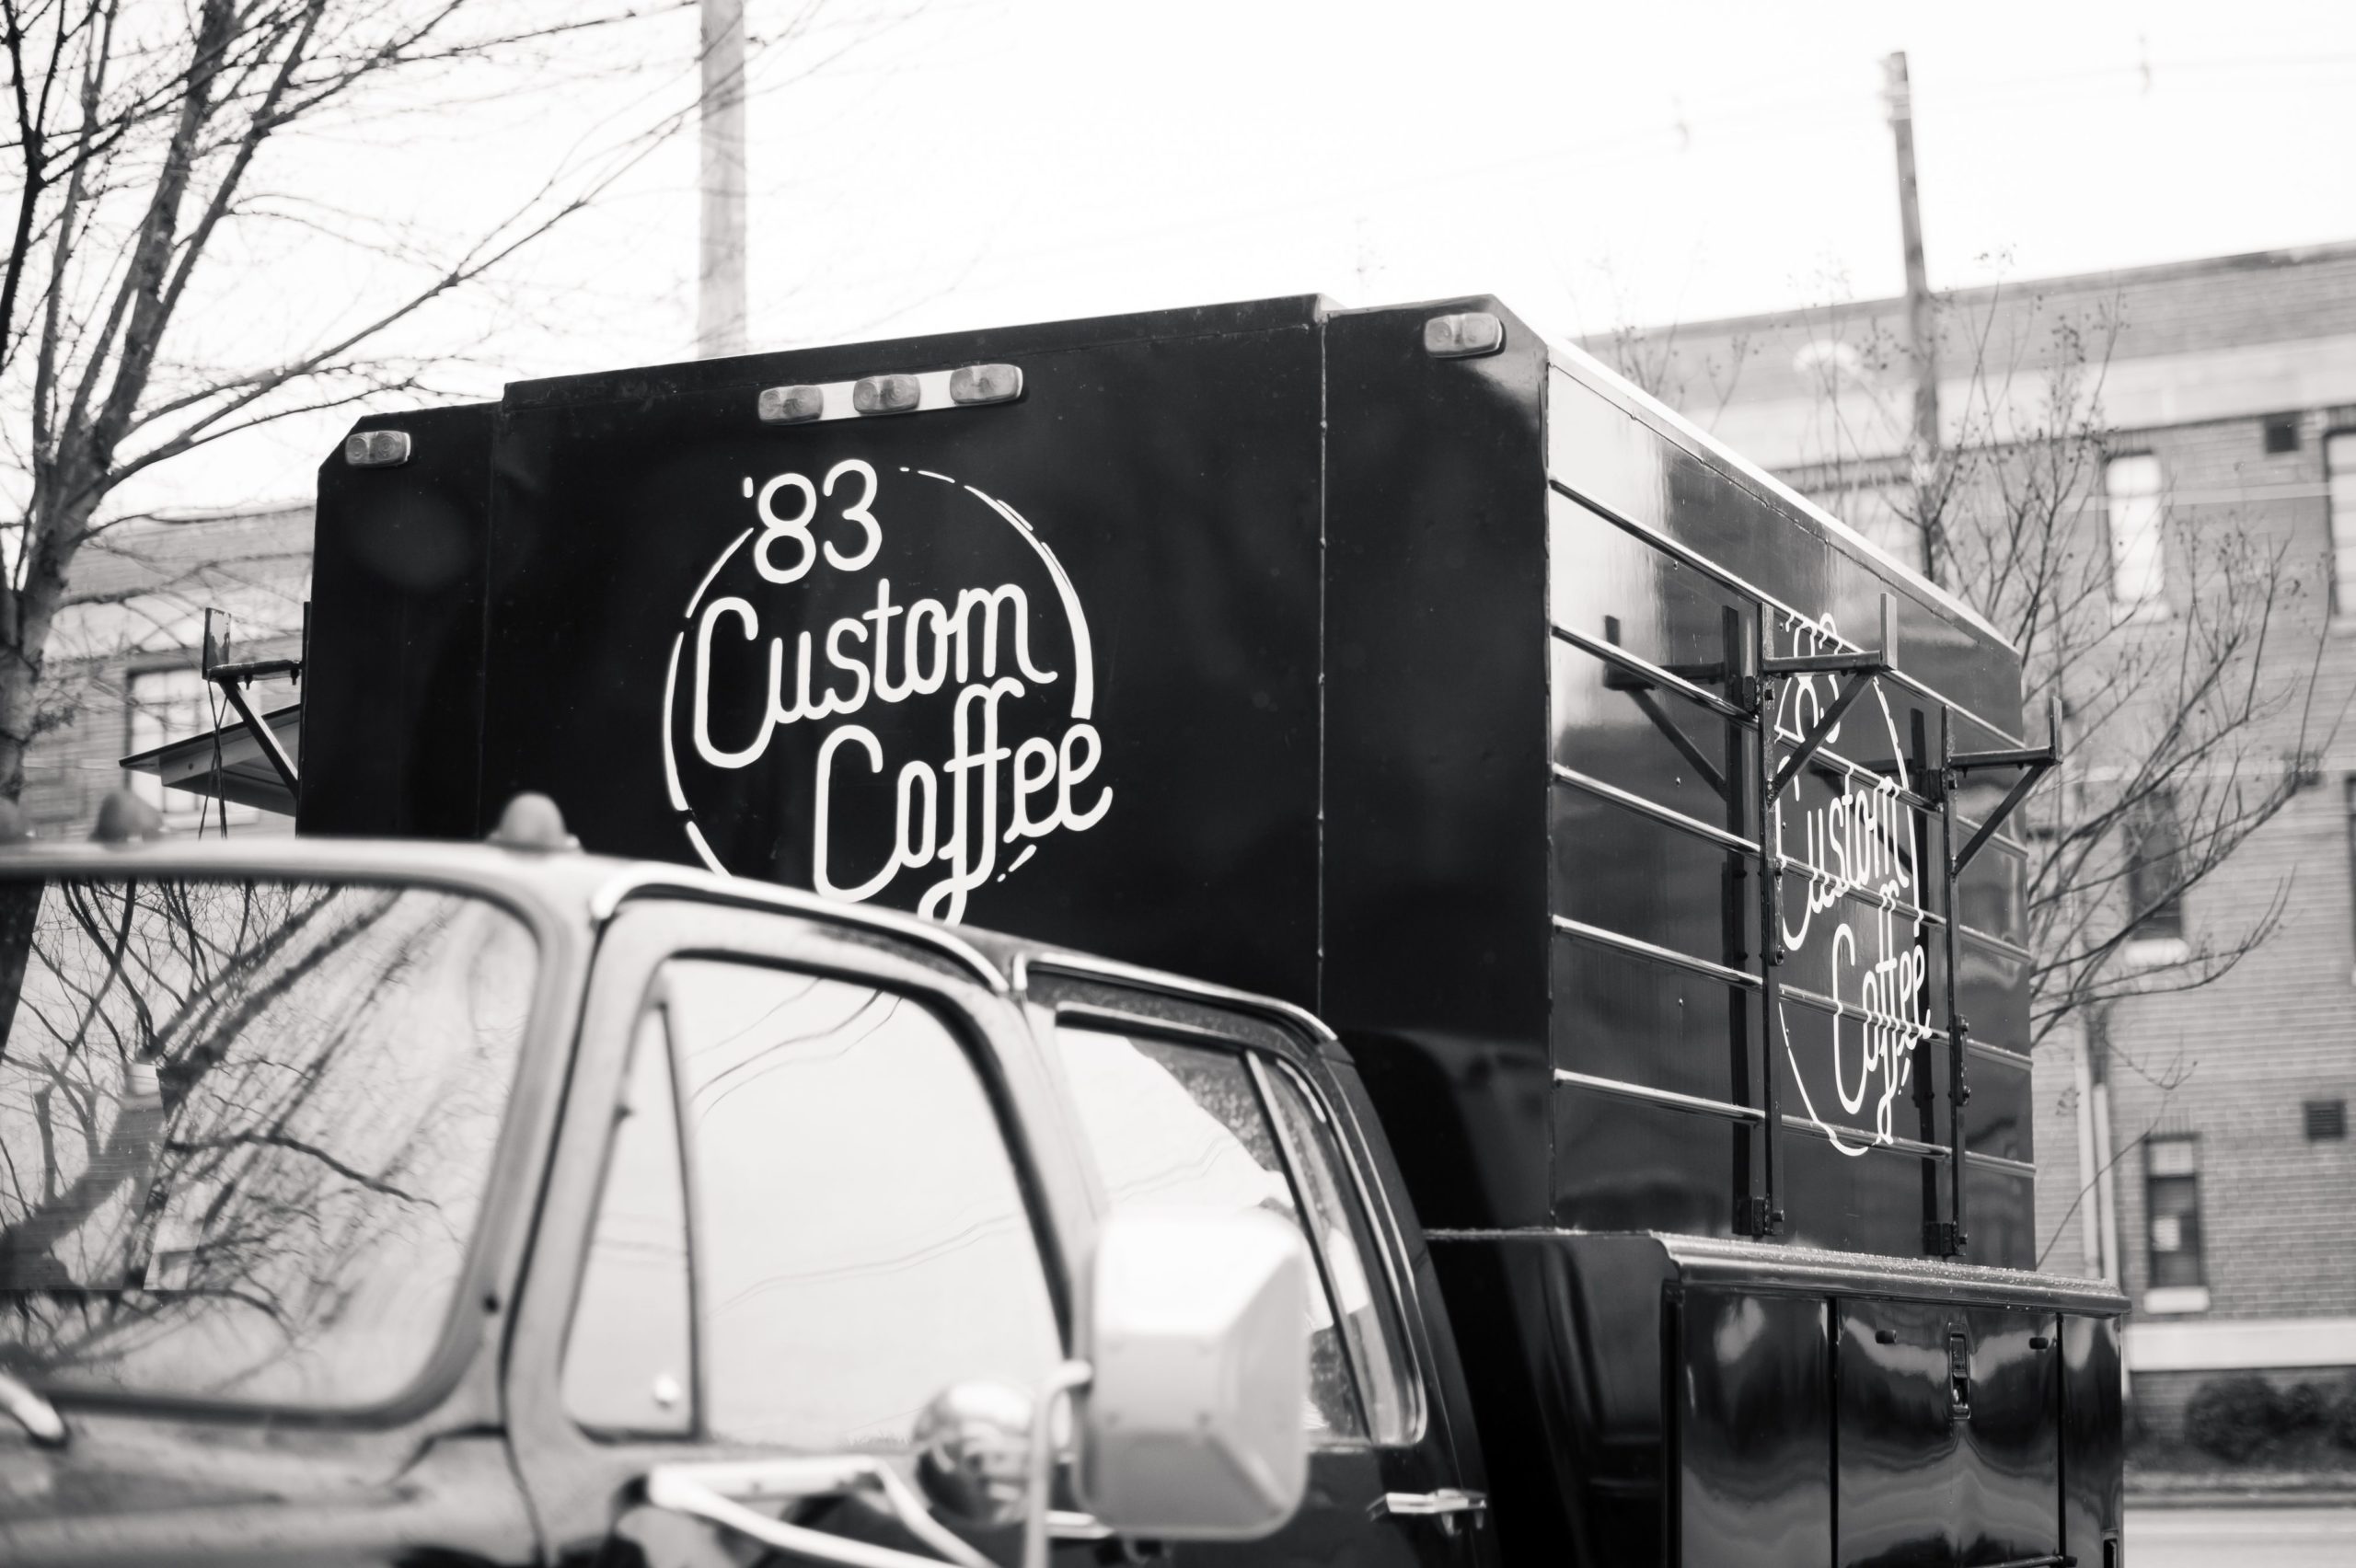 The coffee truck from 83 Custom Coffee in High Point offers a great place to grab coffee in High Point, NC.